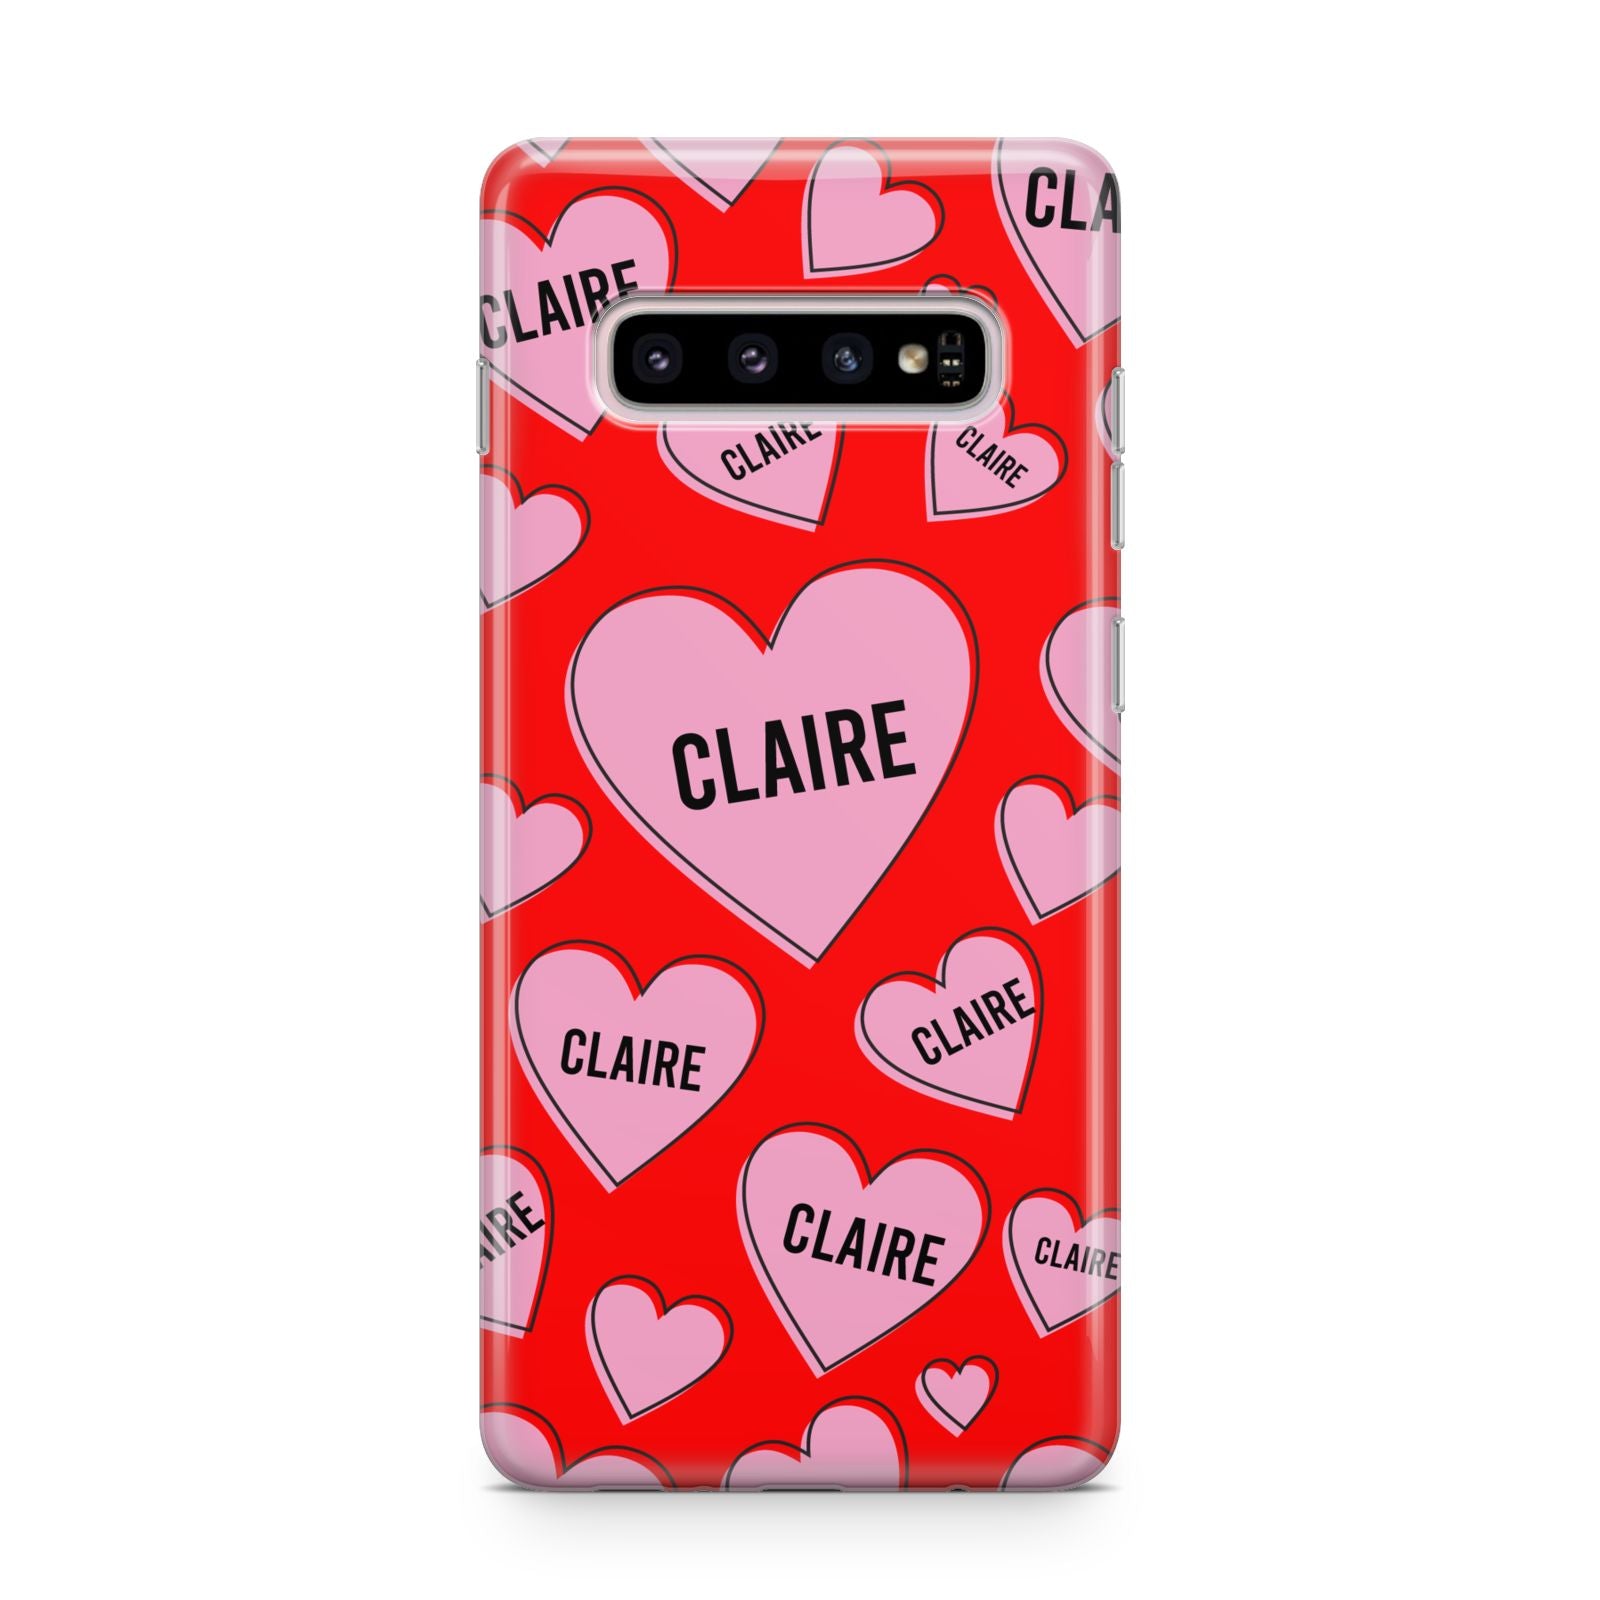 Personalised Hearts Samsung Galaxy S10 Plus Case